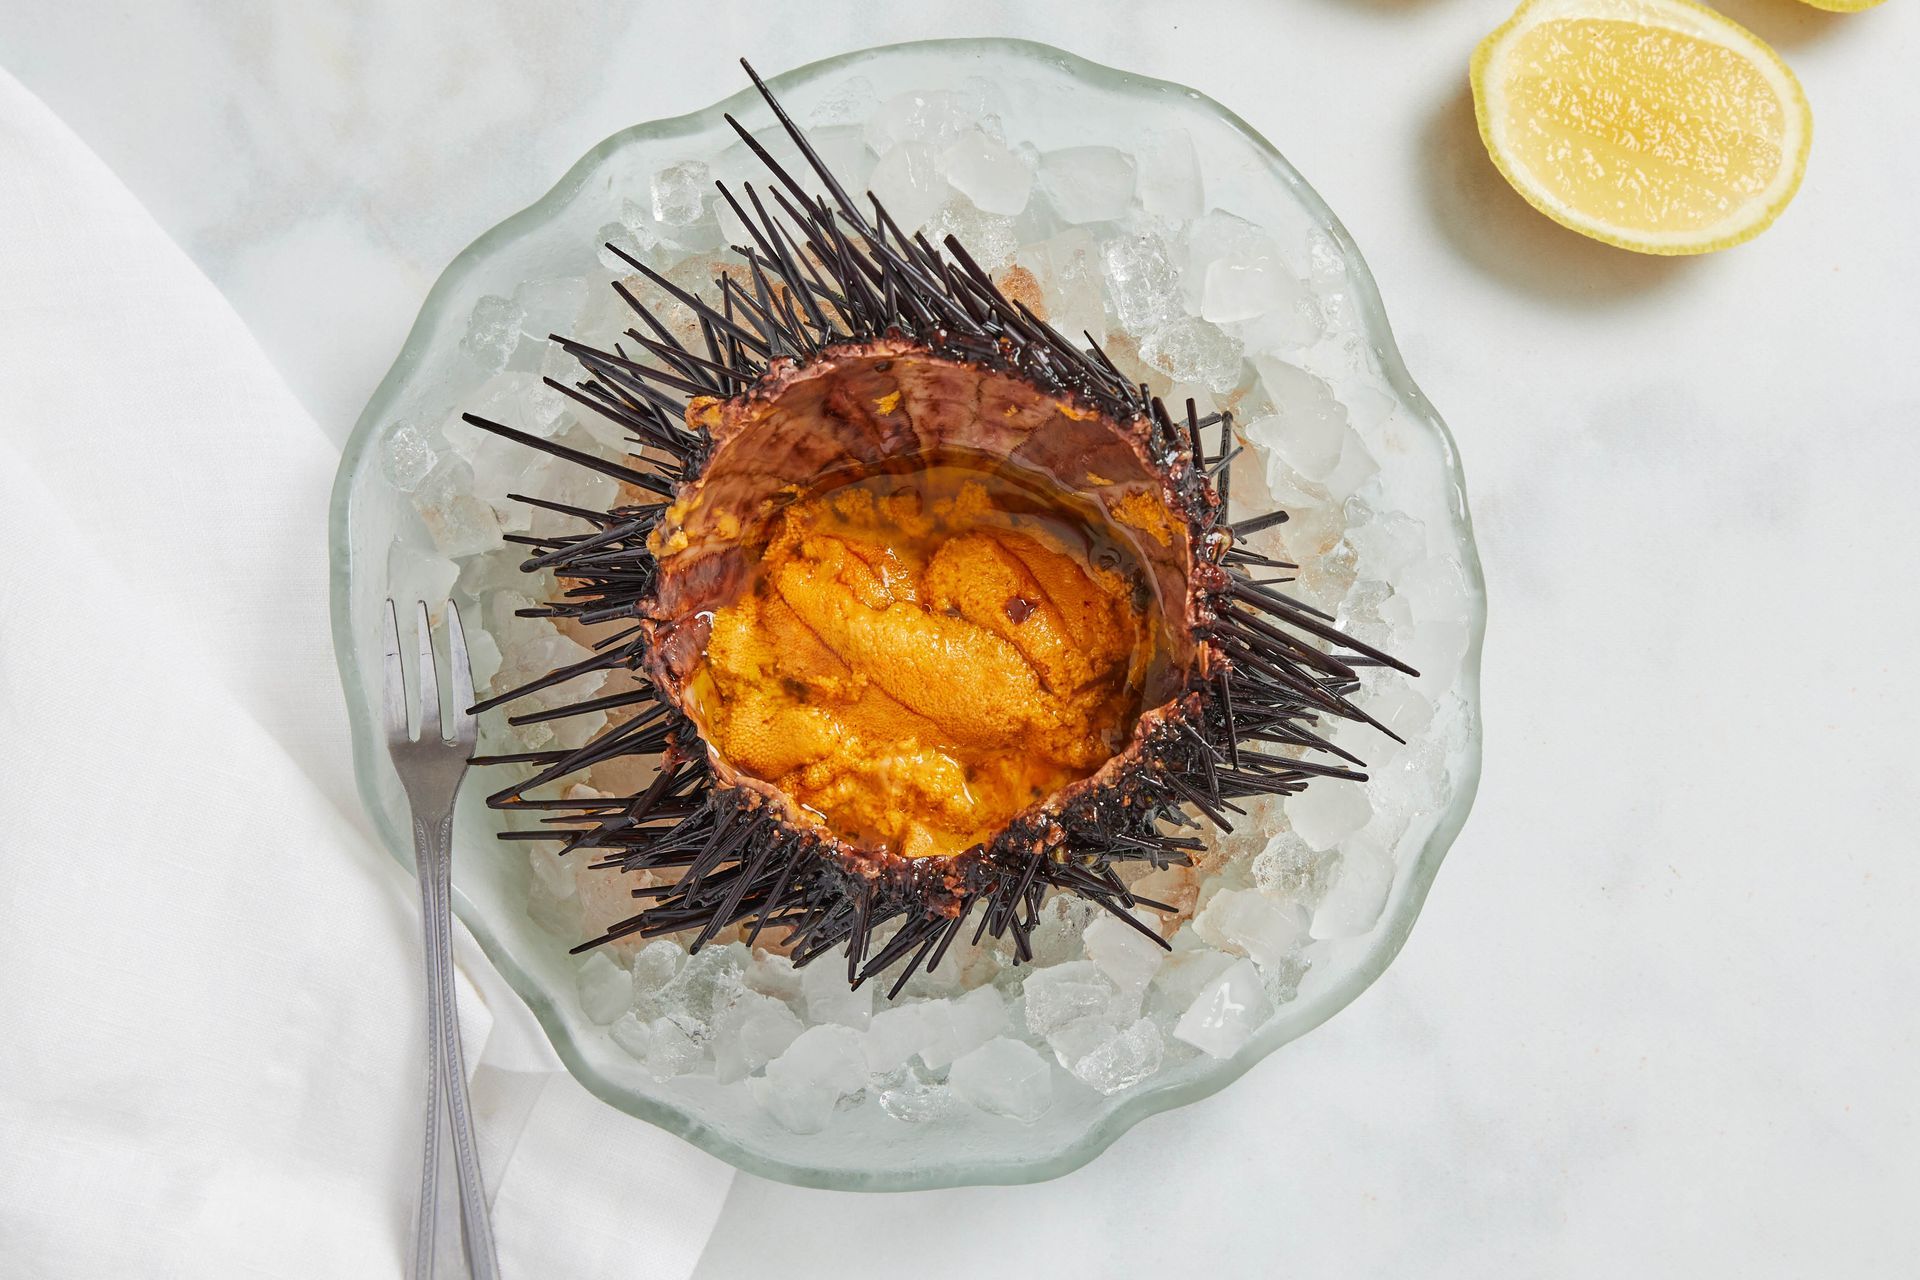 A sea urchin is sitting on ice on a plate with a fork.